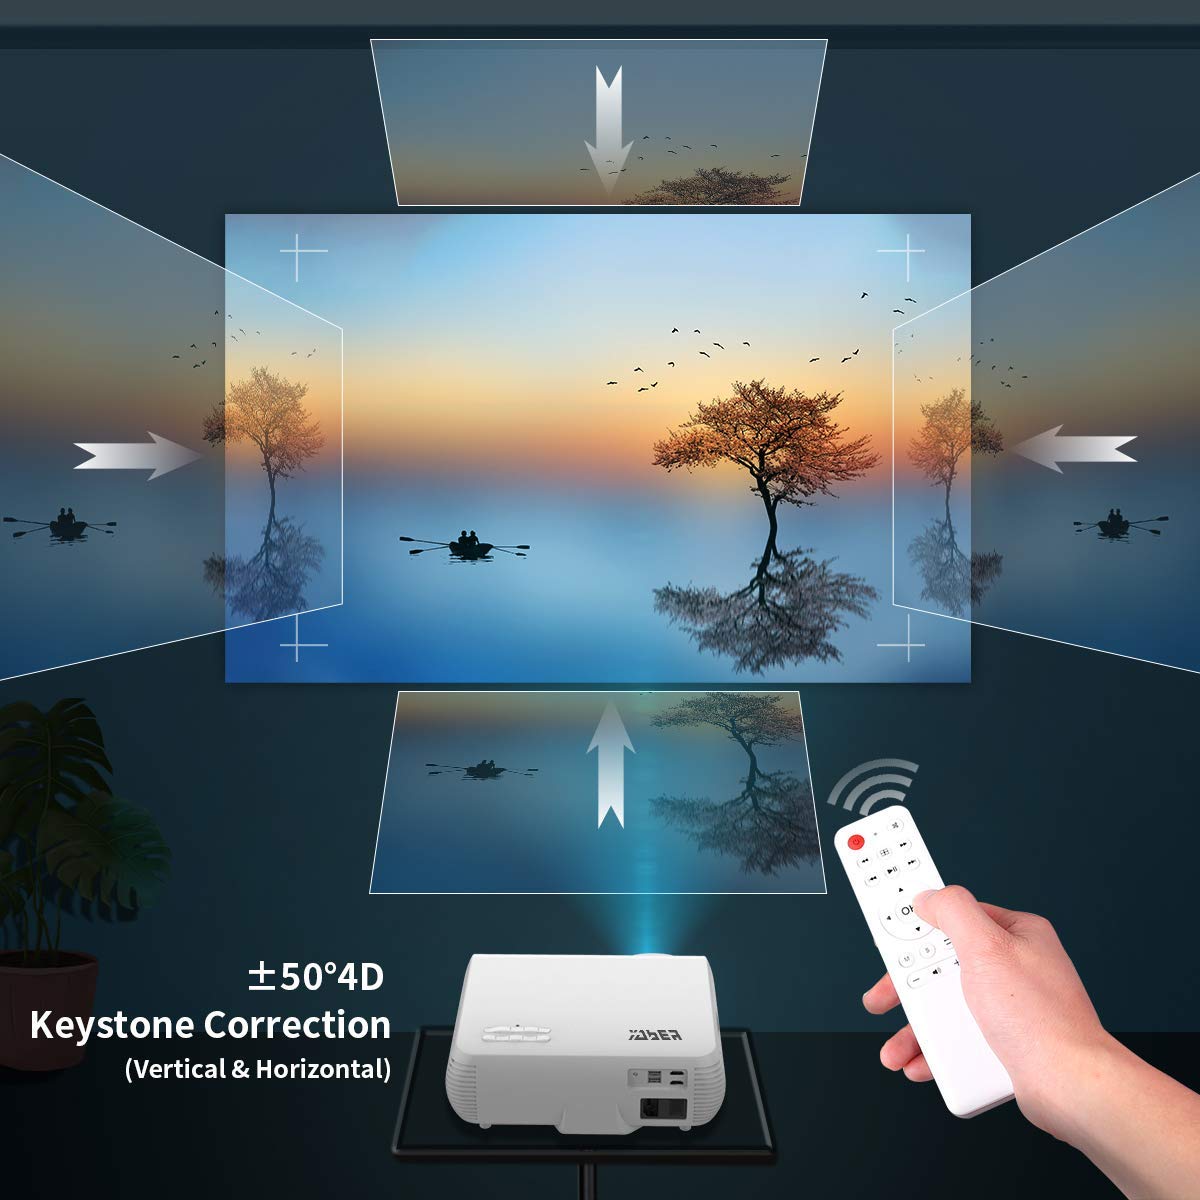 YABER Y30 Native 1080P Projector 8500L Full HD Video Projector 1920 x 1080, ±50° 4D Keystone Correction Support 4k & Zoom,LCD LED Home Theater Projector Compatible with Phone,PC,TV Box,PS4